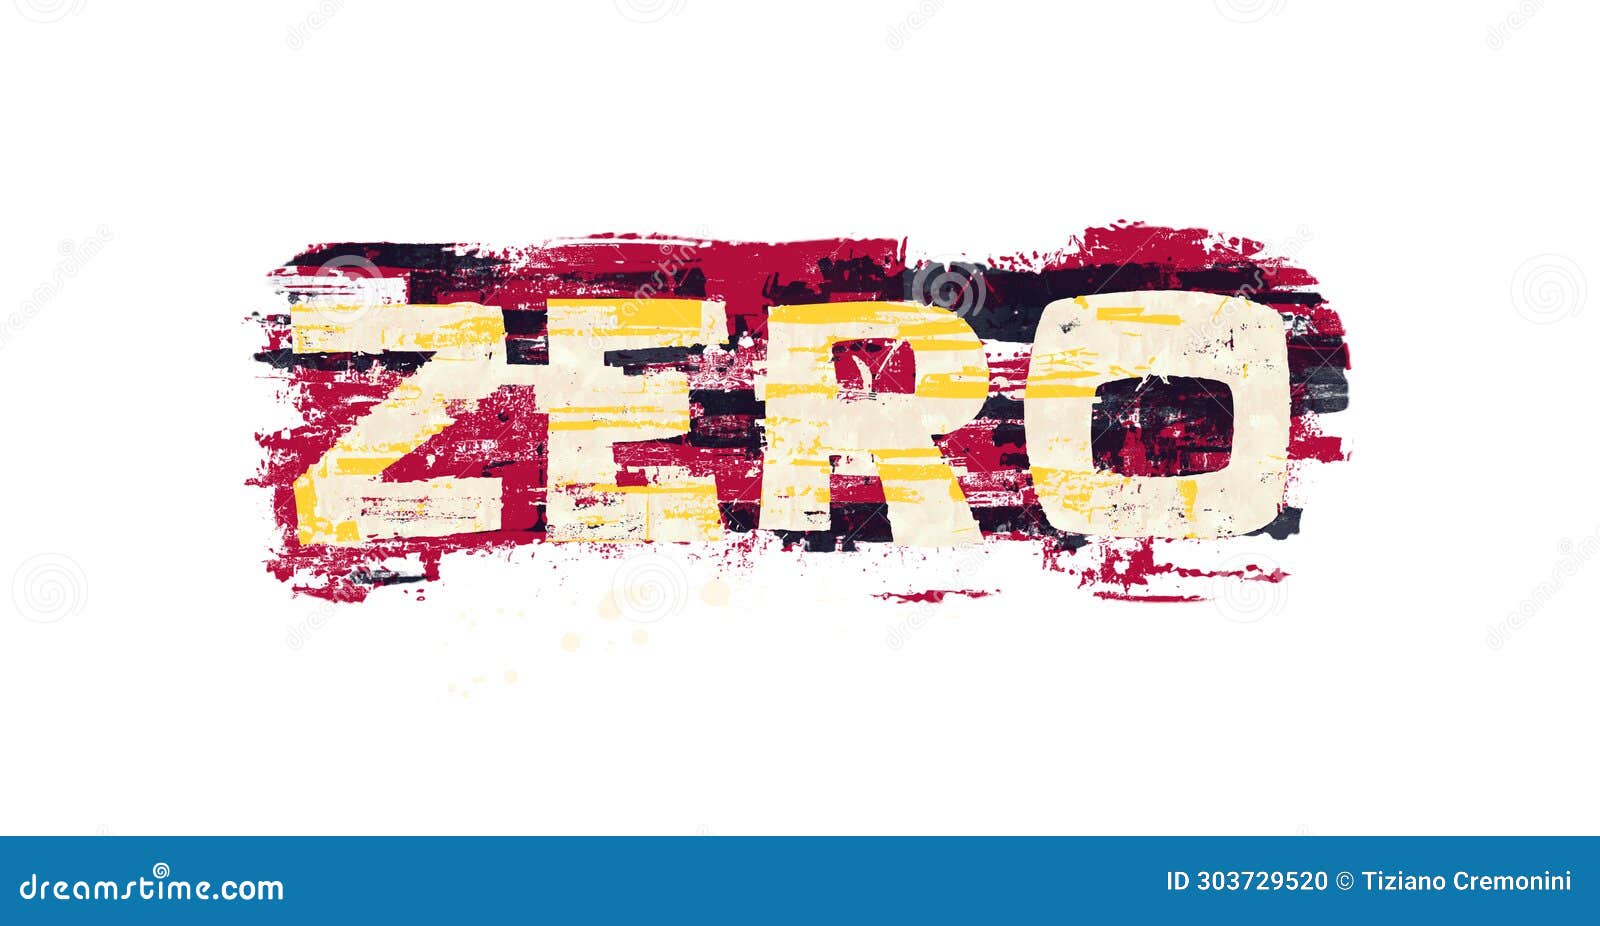 zero, word in graffiti style, graphic  and typography